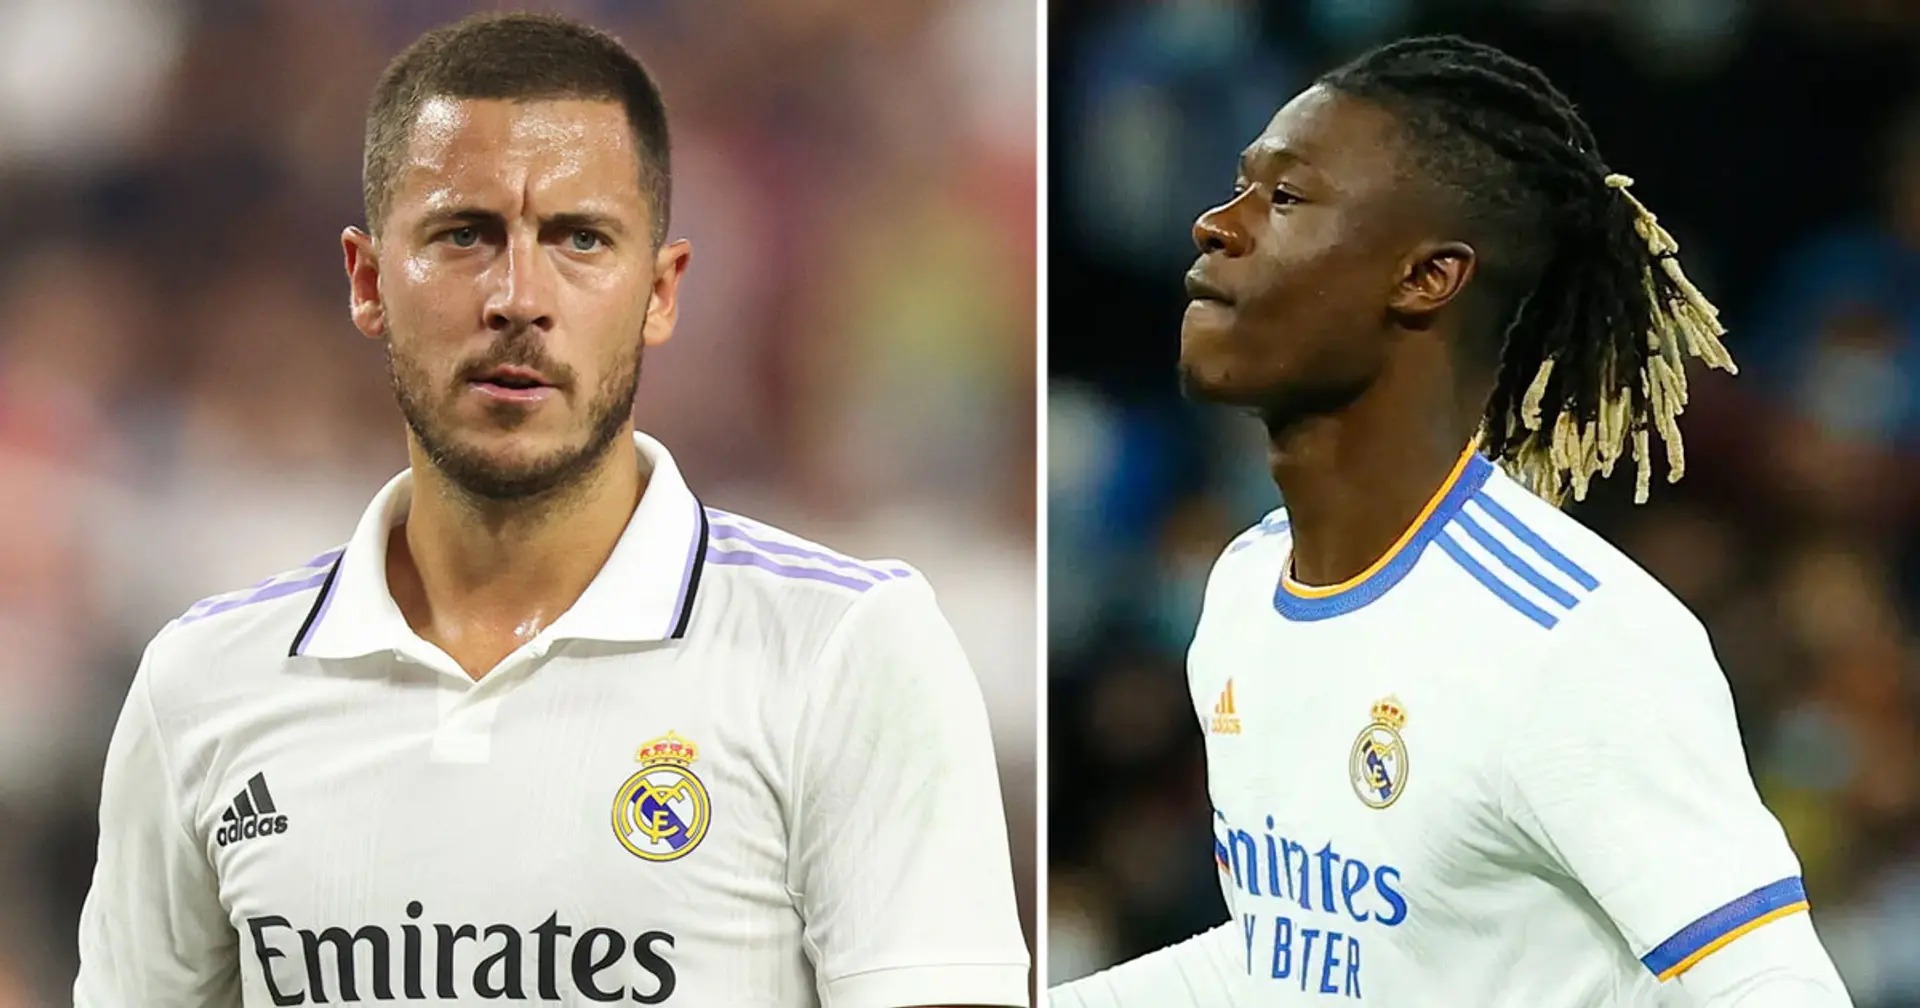 6 players who impressed the most in Real Madrid pre-season